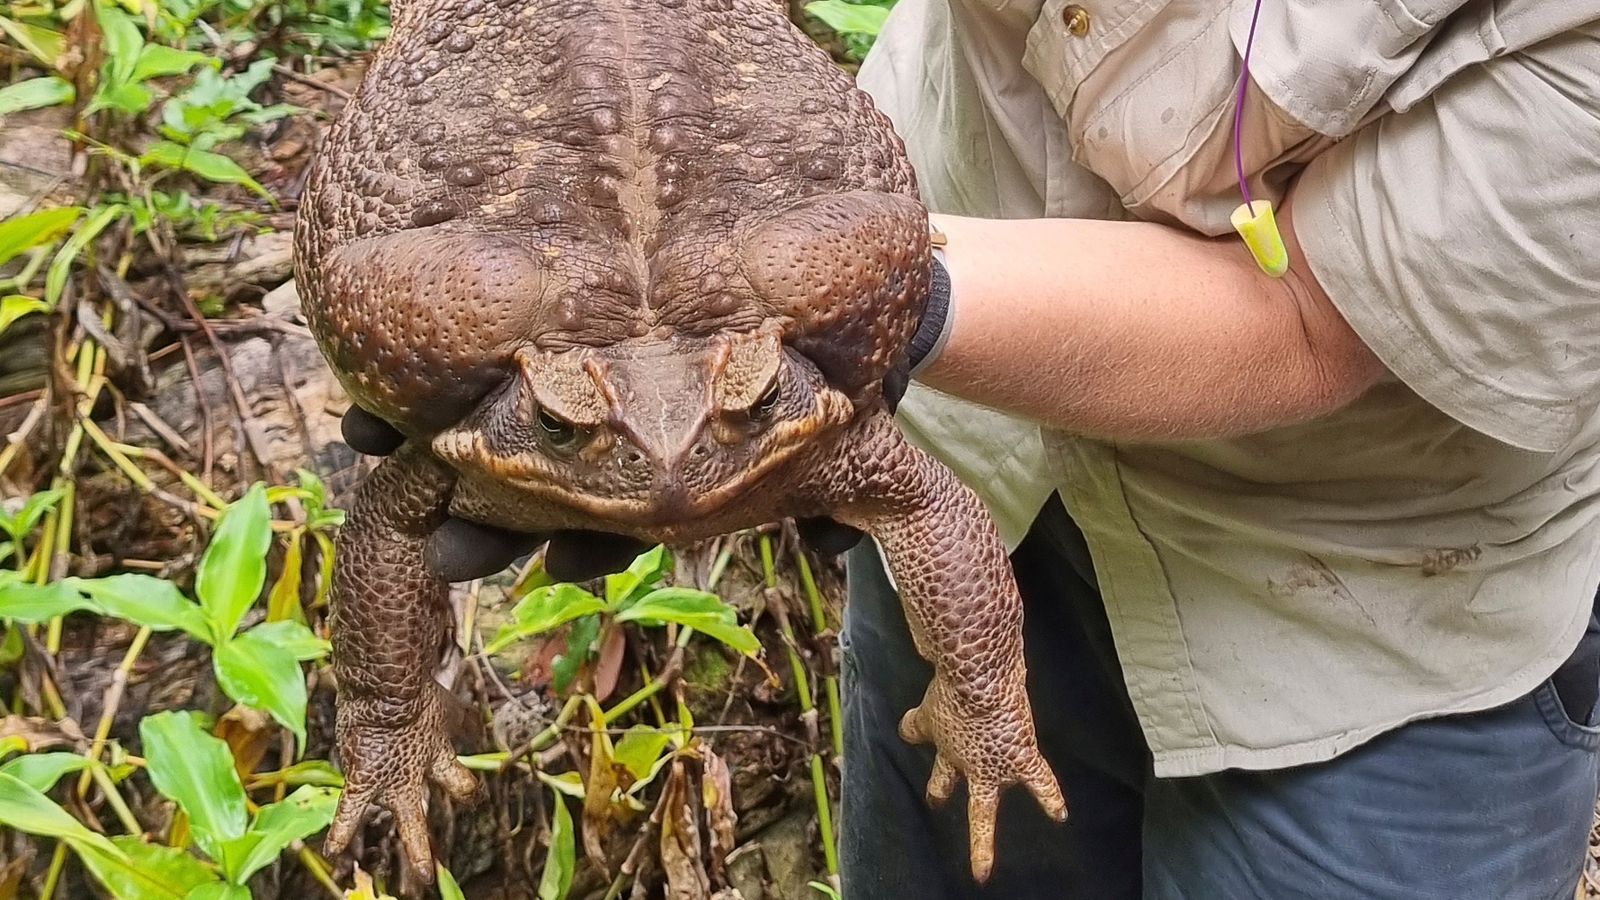 'Toadzilla': Giant cane toad found in Australia weighing 2.7kg